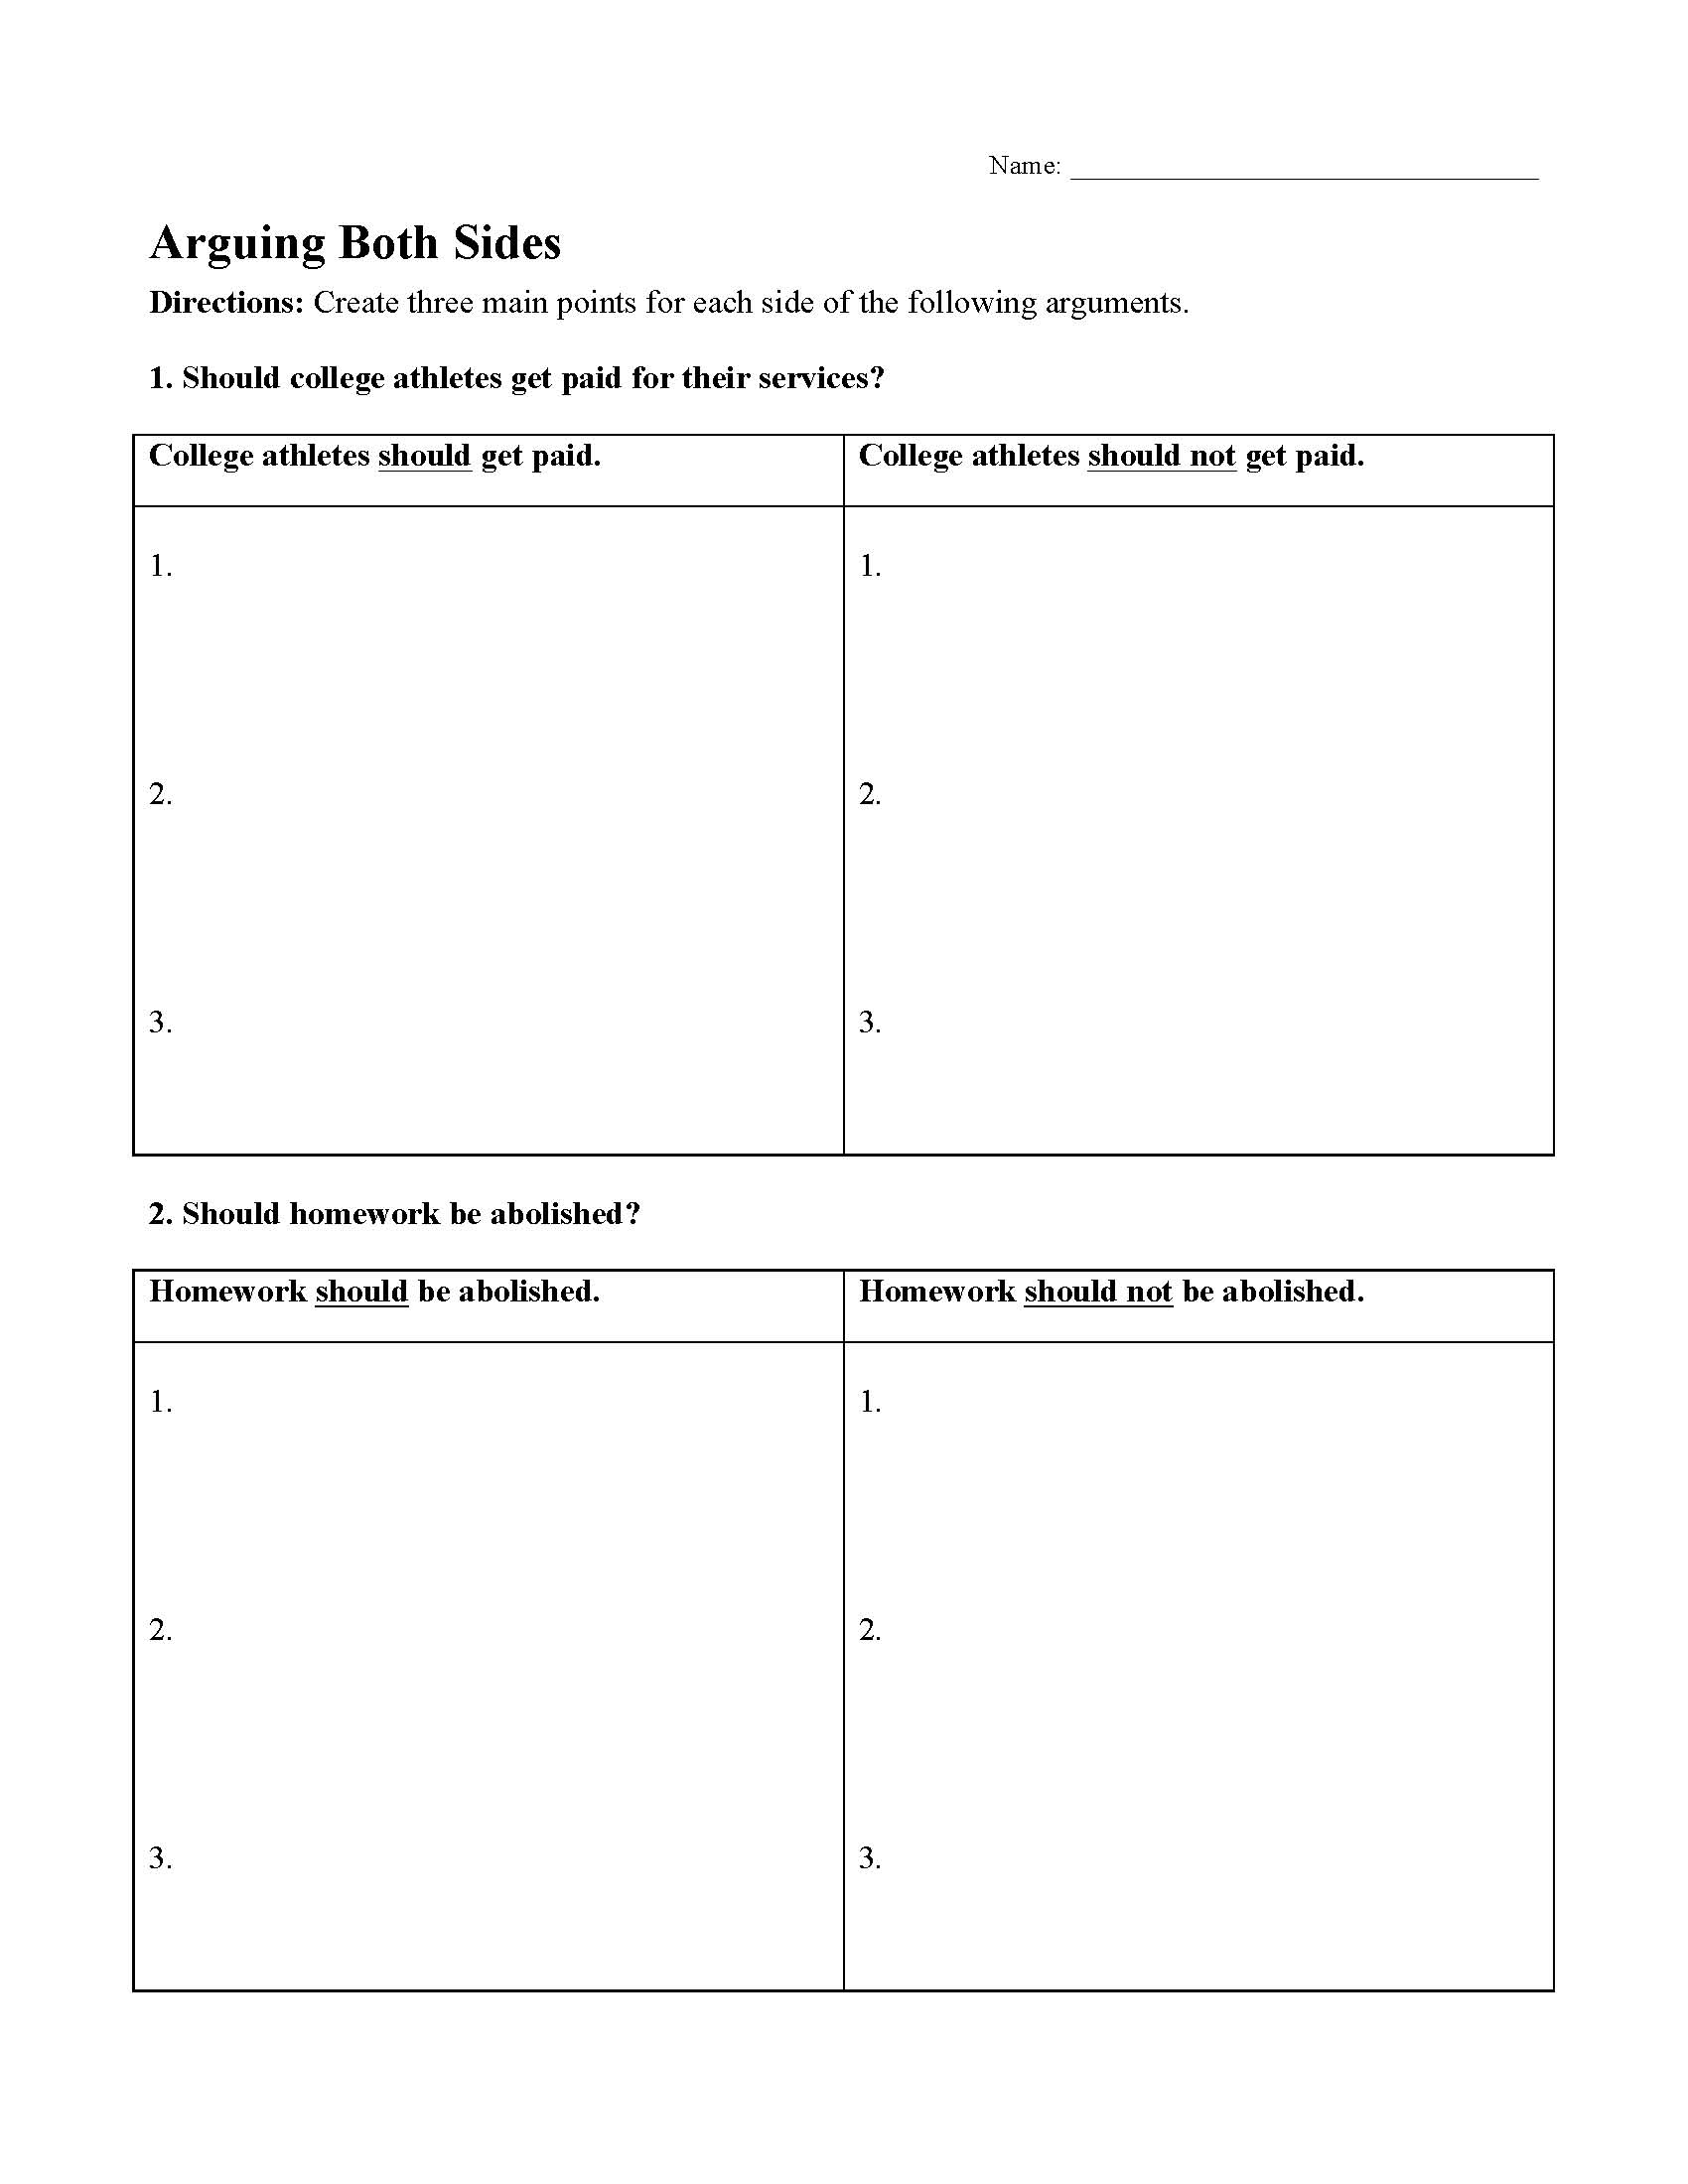 This is a preview image of the Arguing Both Sides Worksheet.